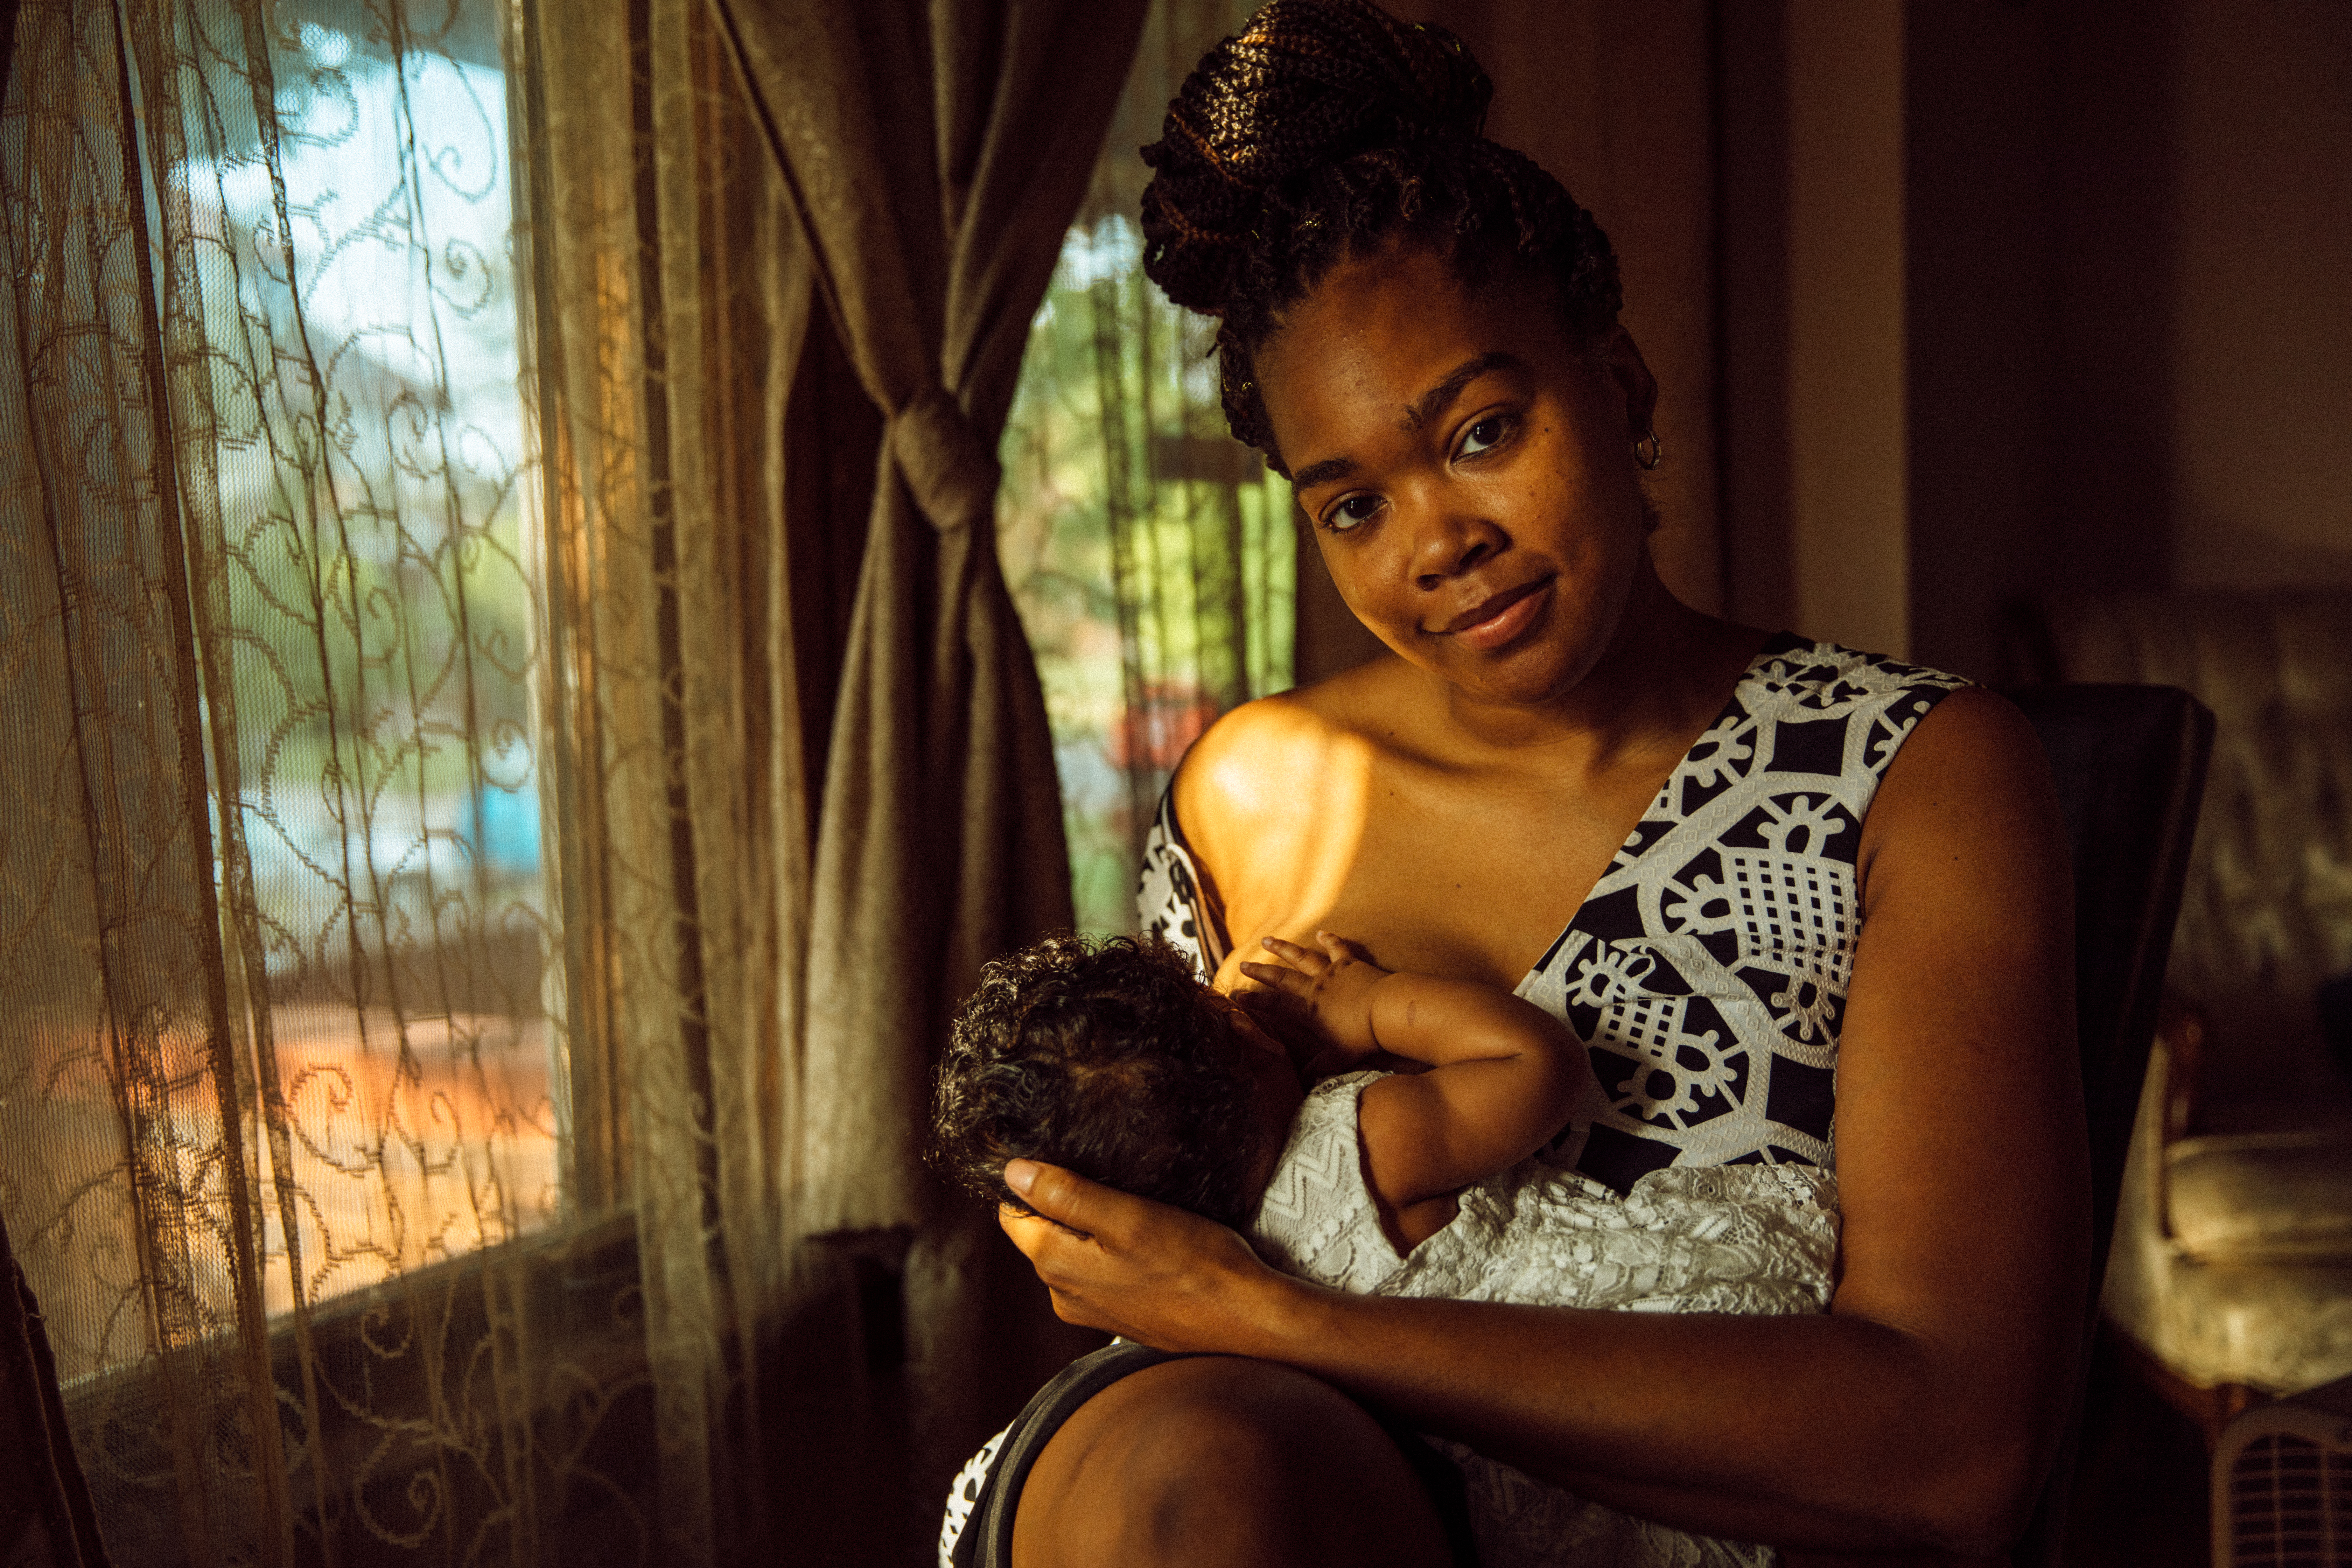 Shardaya Fuquay sits by the window to breastfeed her baby inside her Detroit home.